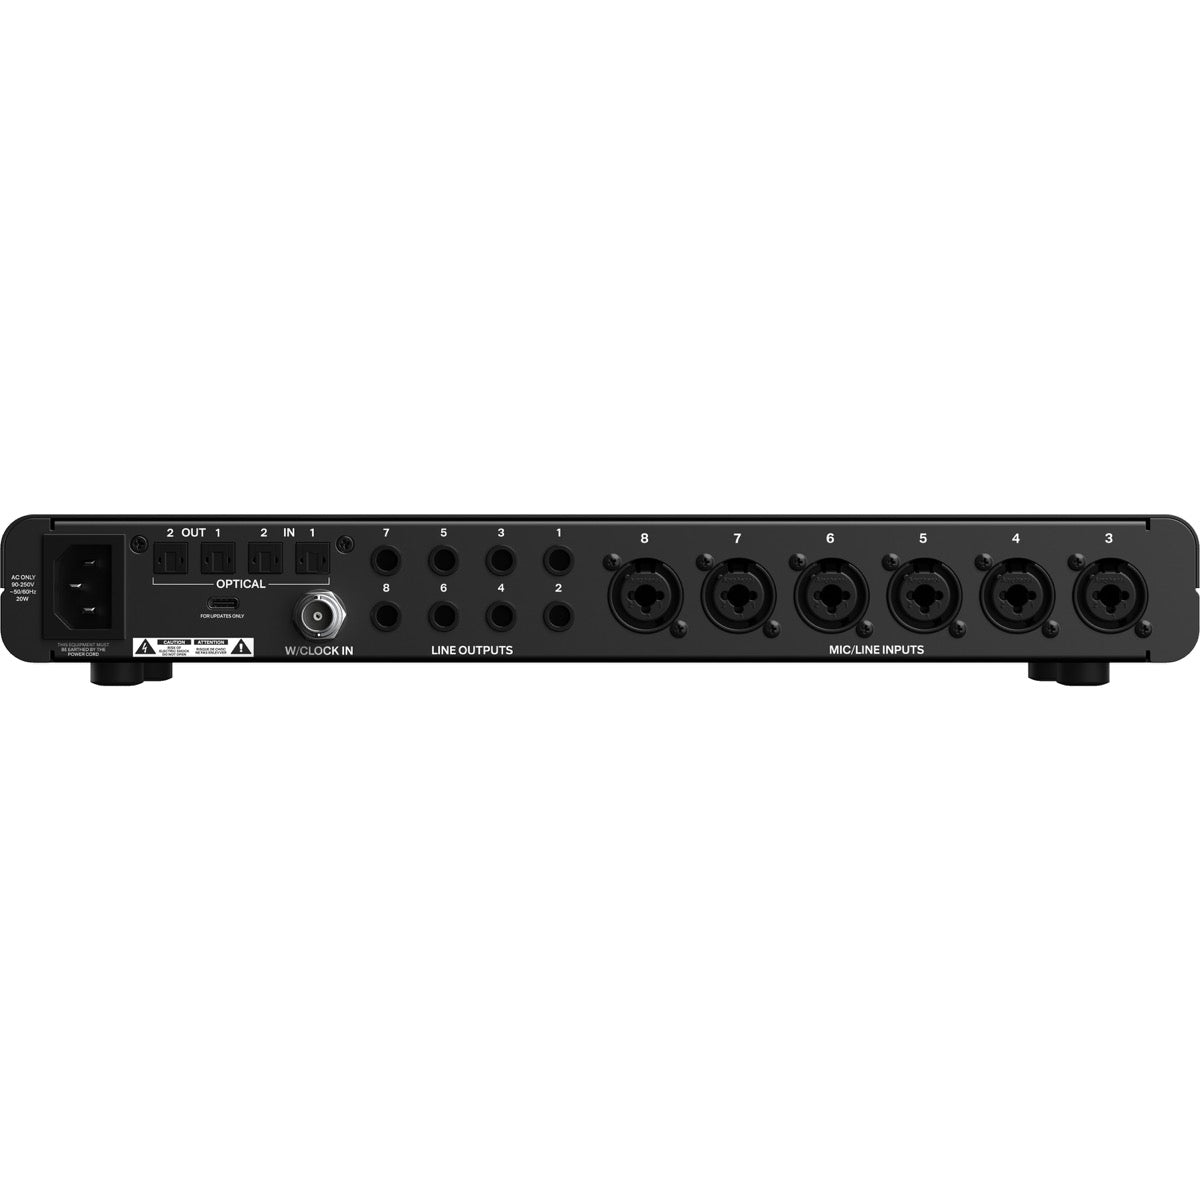 Audient Evo SP8 8-Channel Mic Preamp View 3